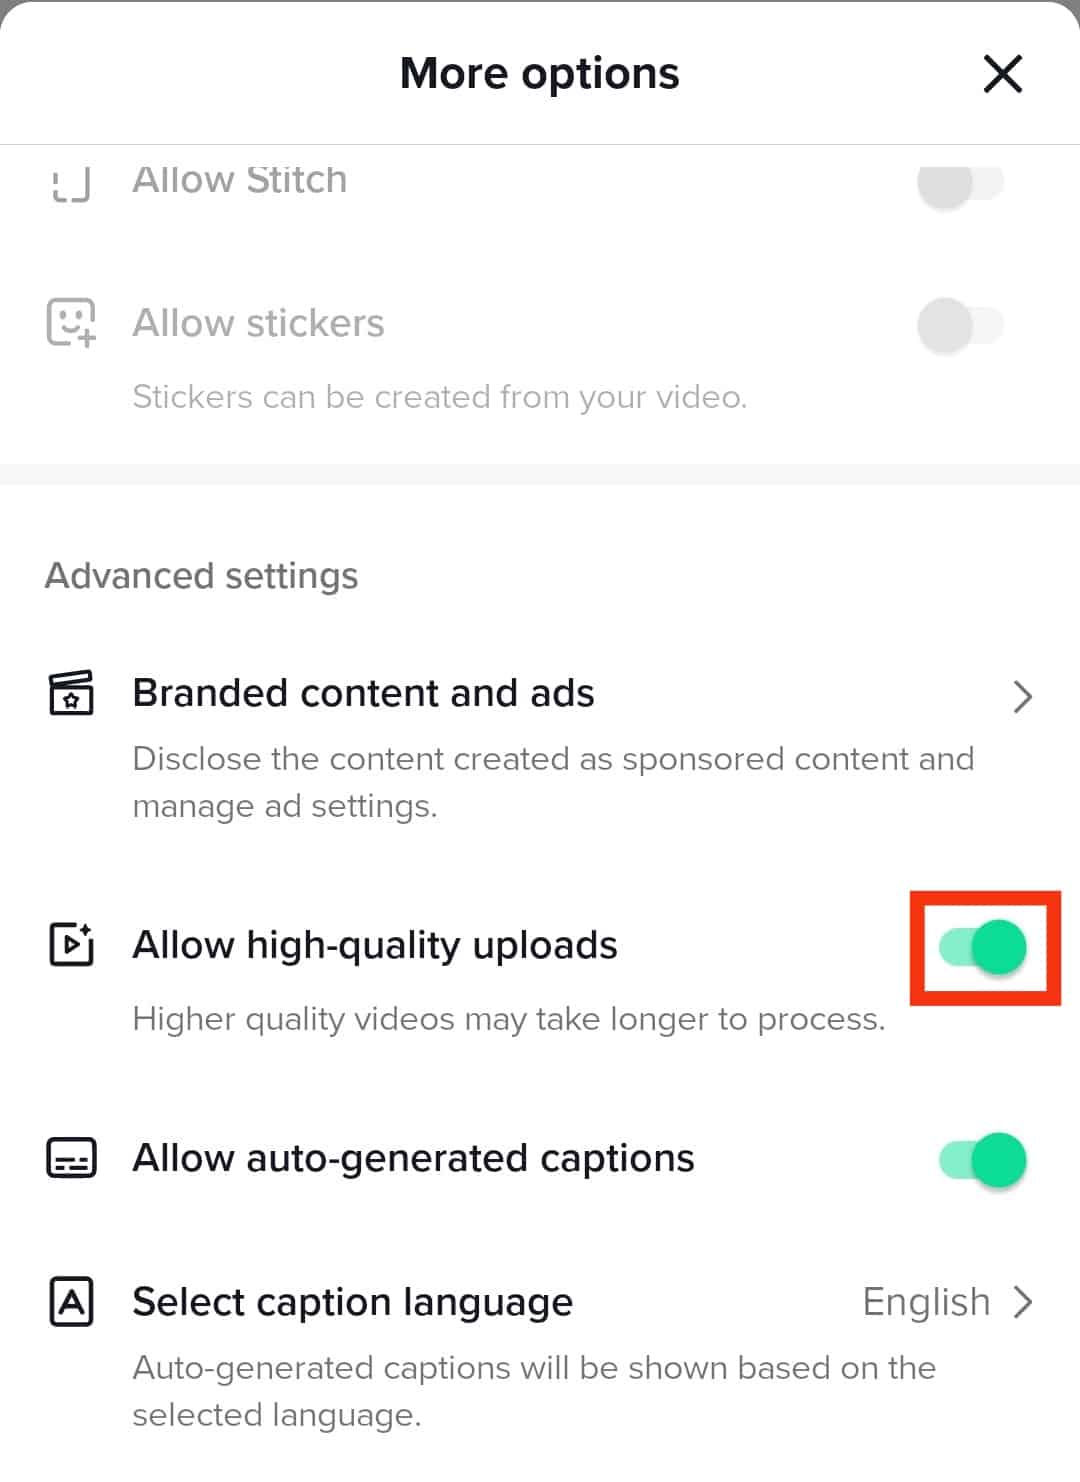 Toggle On Allow High-Quality Uploads